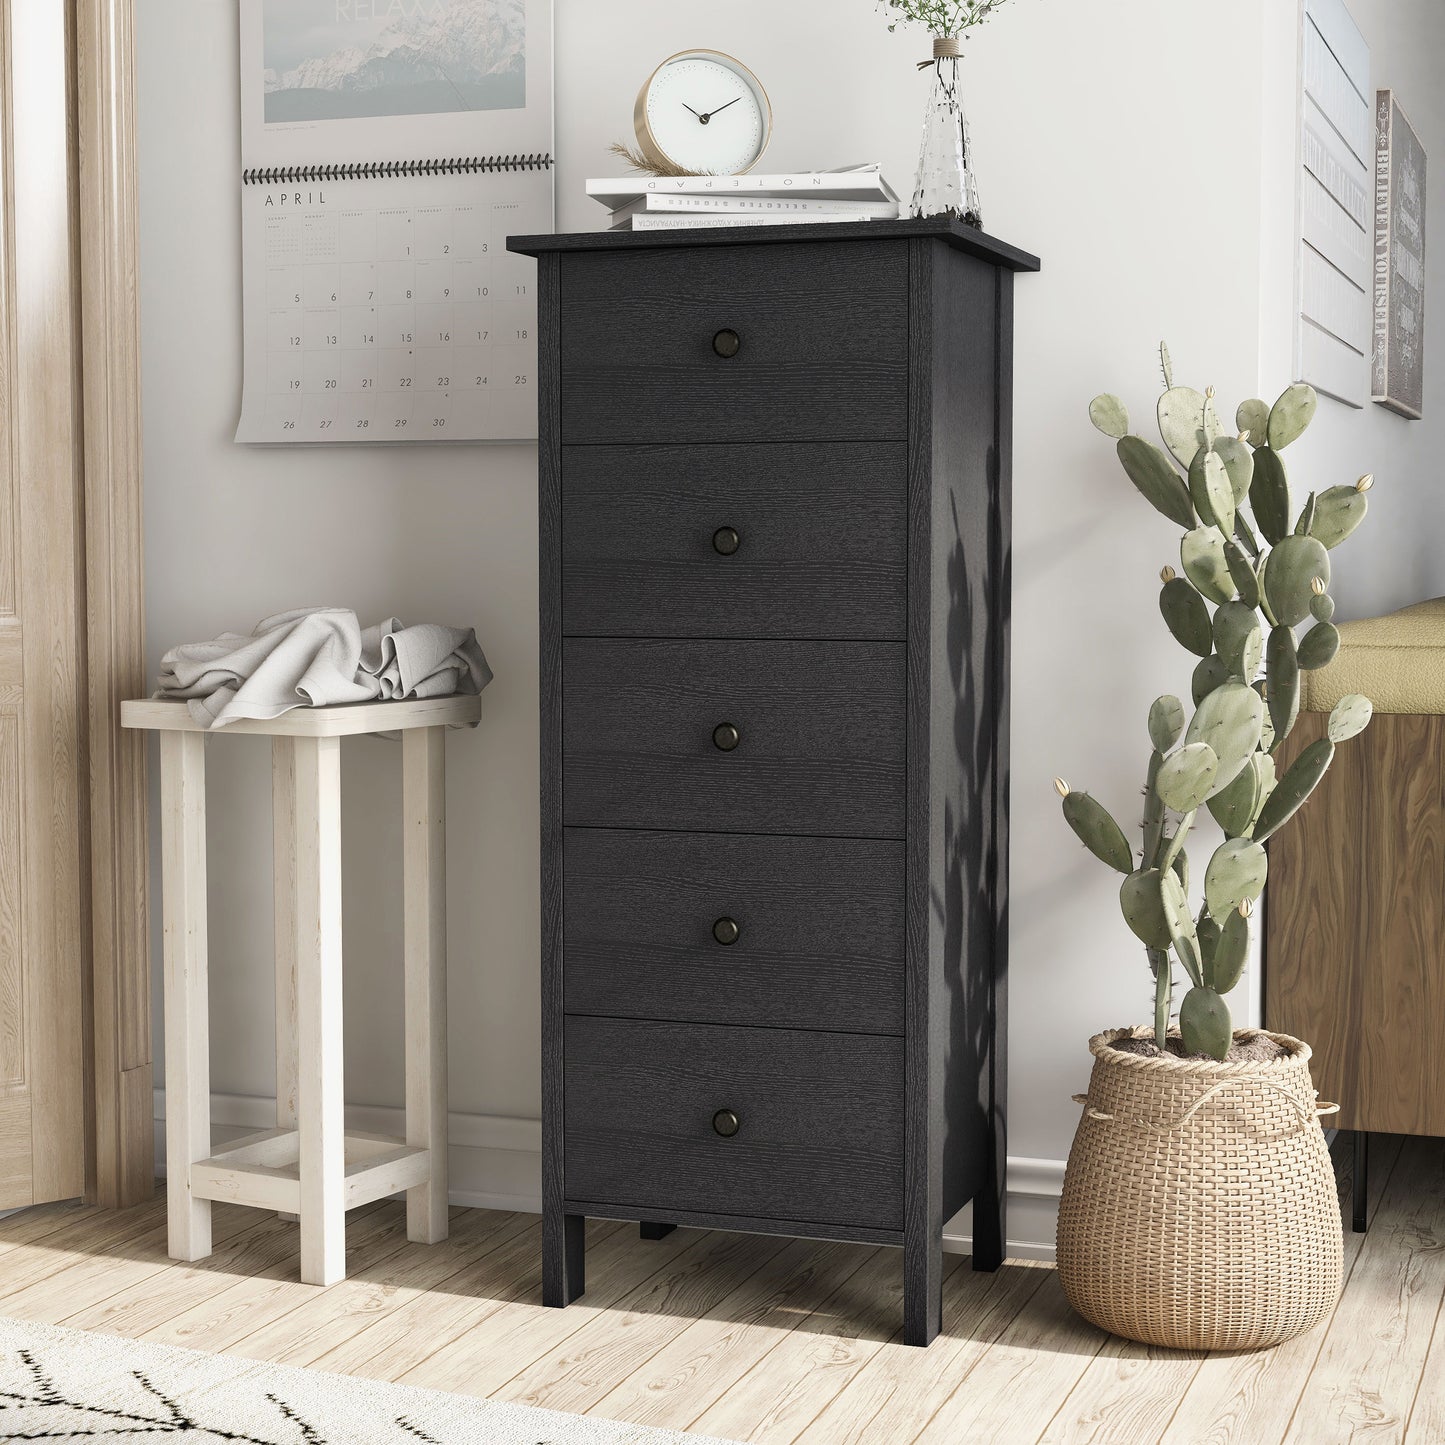 Left angled transitional black slim five-drawer chest in a living area with accessories